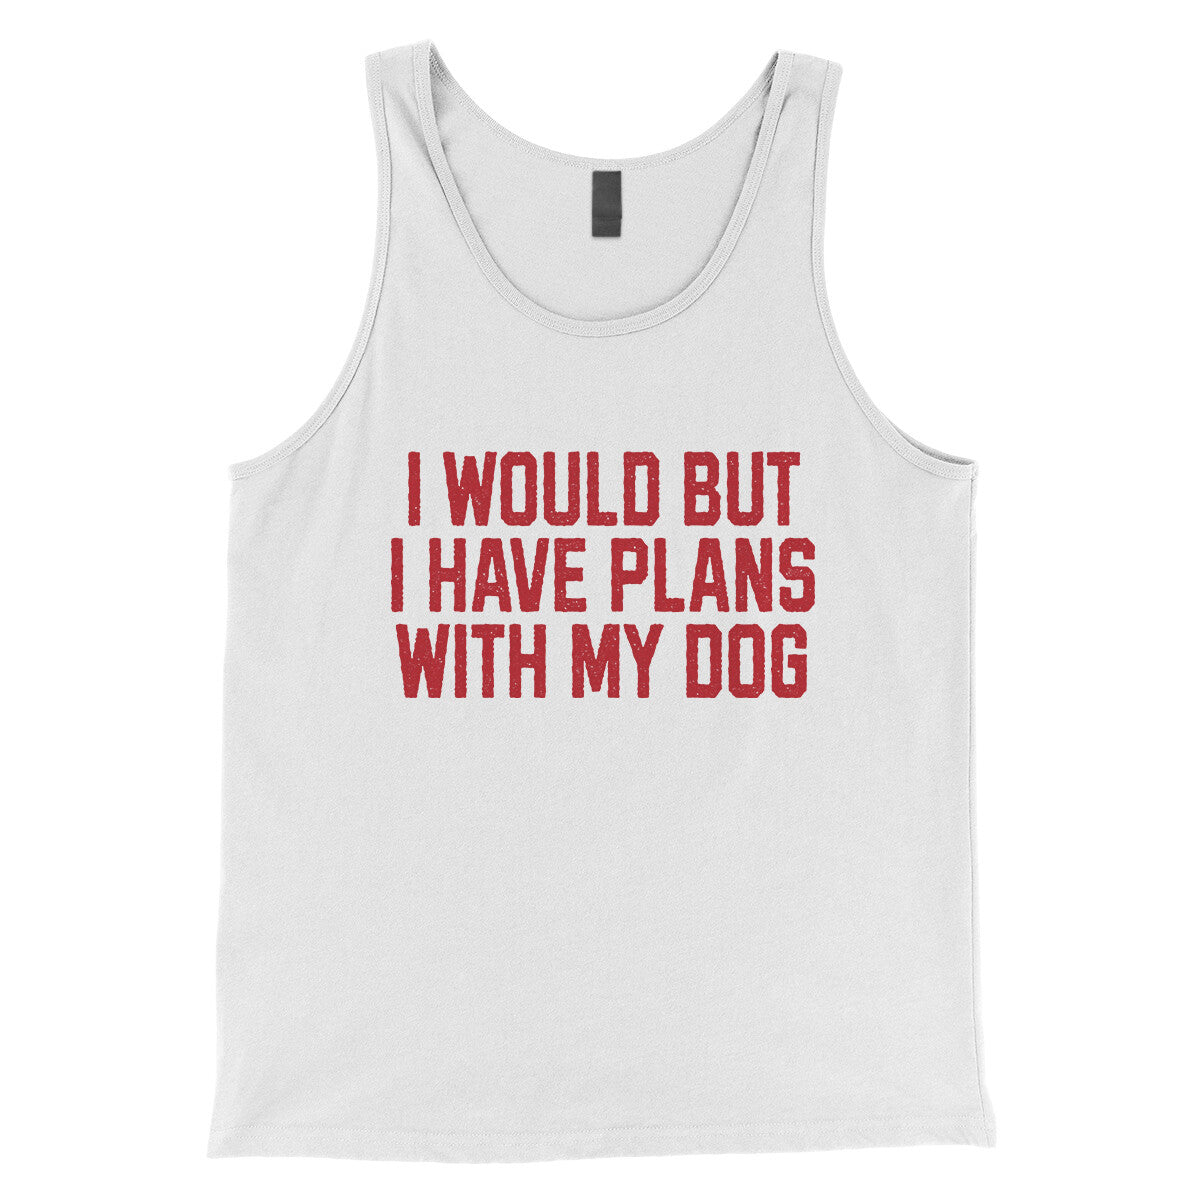 I Would but I Have Plans with My Dog in White Color